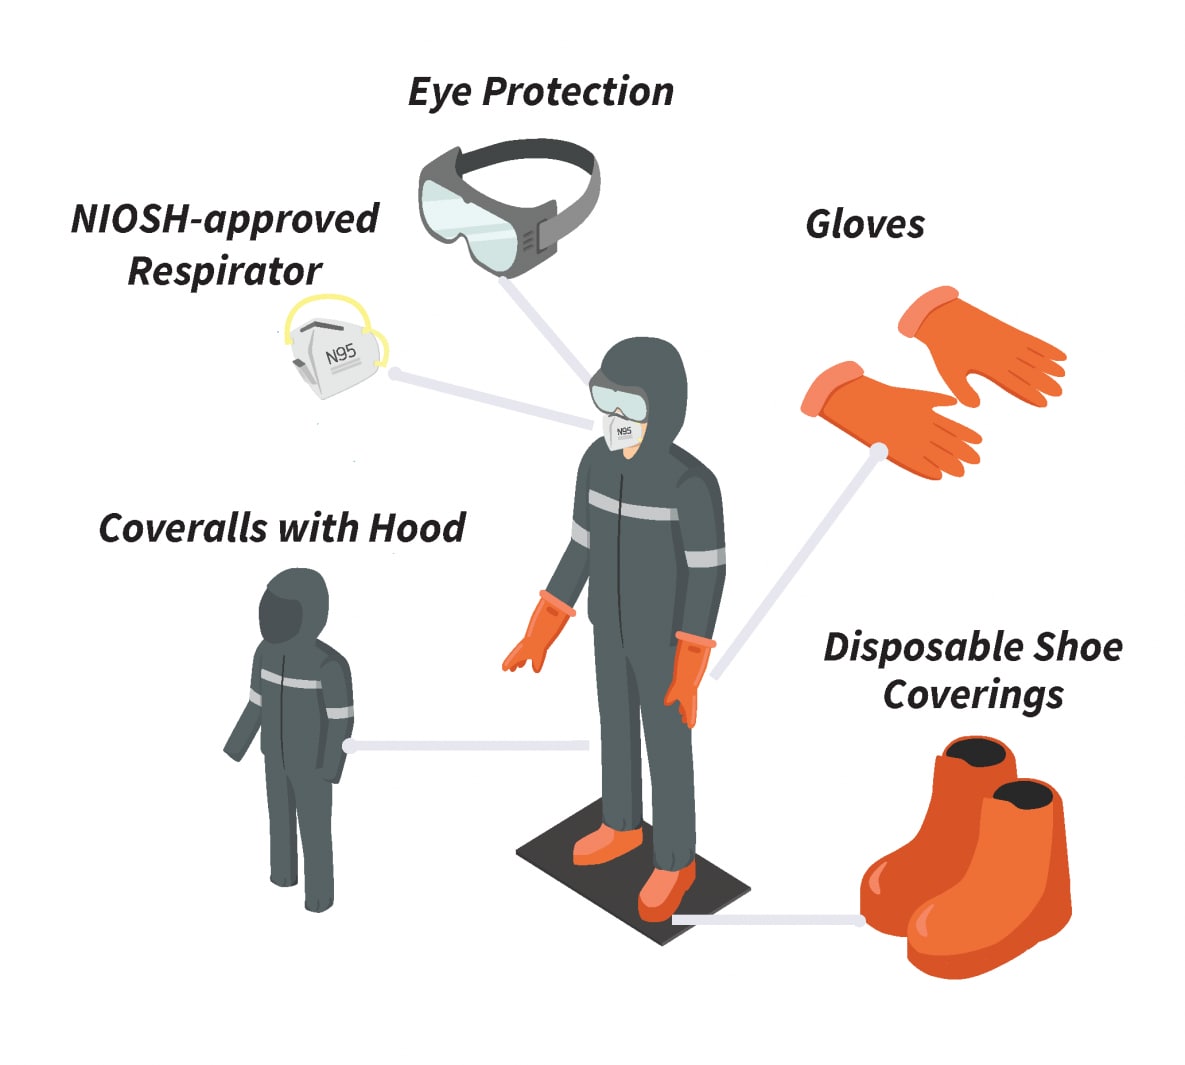 Person wearing eye protection, disposable shoe coverings, gloves, coveralls with hood, and NIOSH-approved respirator